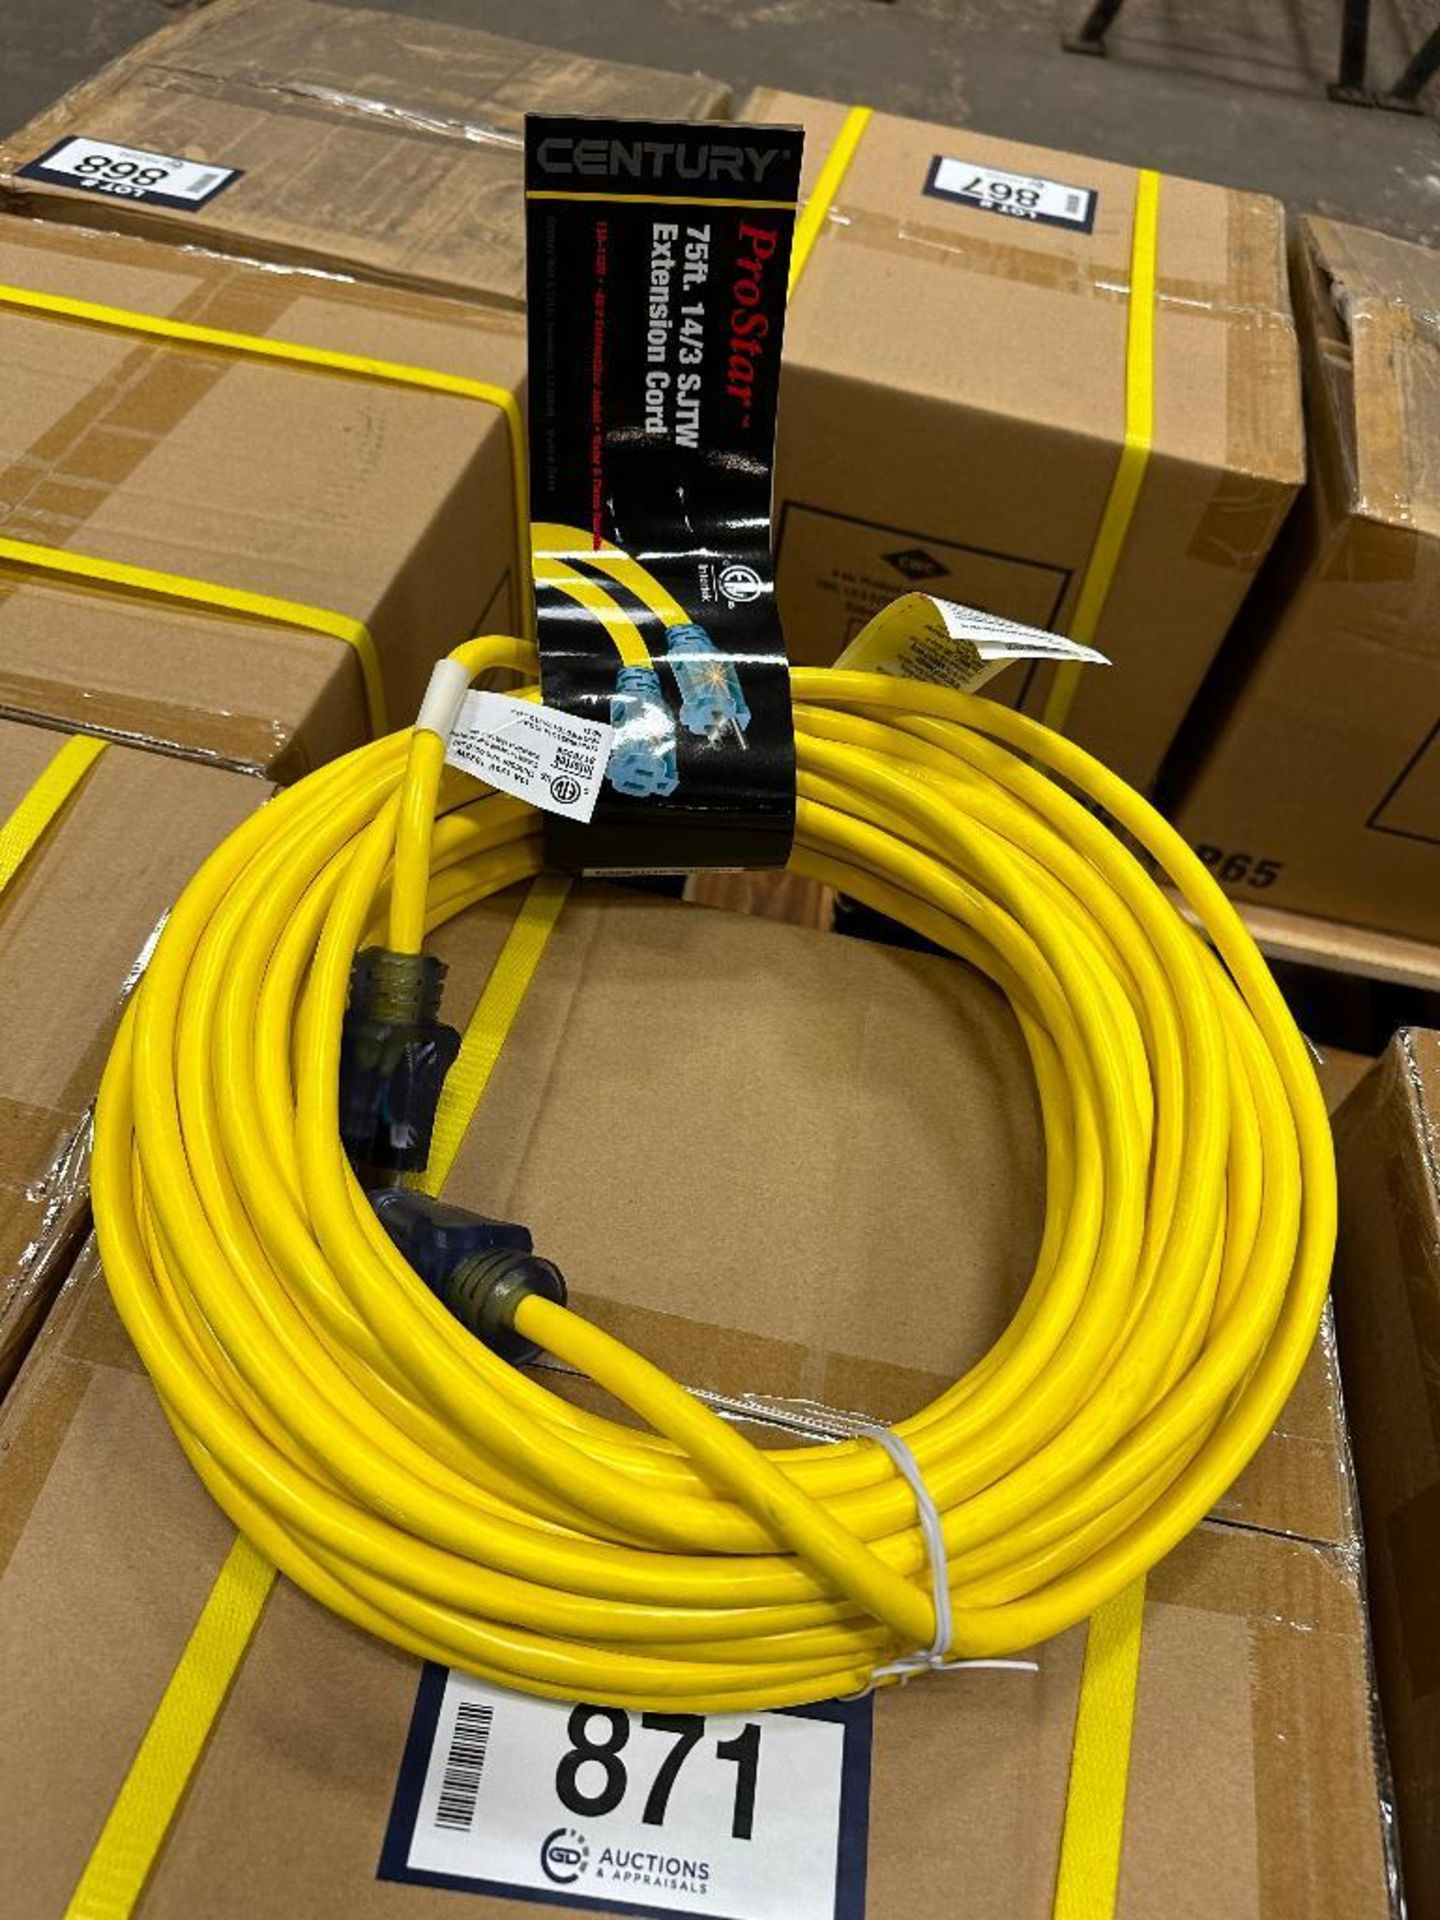 Box of (4) 75' 14/3 Pro Star Lighted Extension Cords - Image 3 of 5